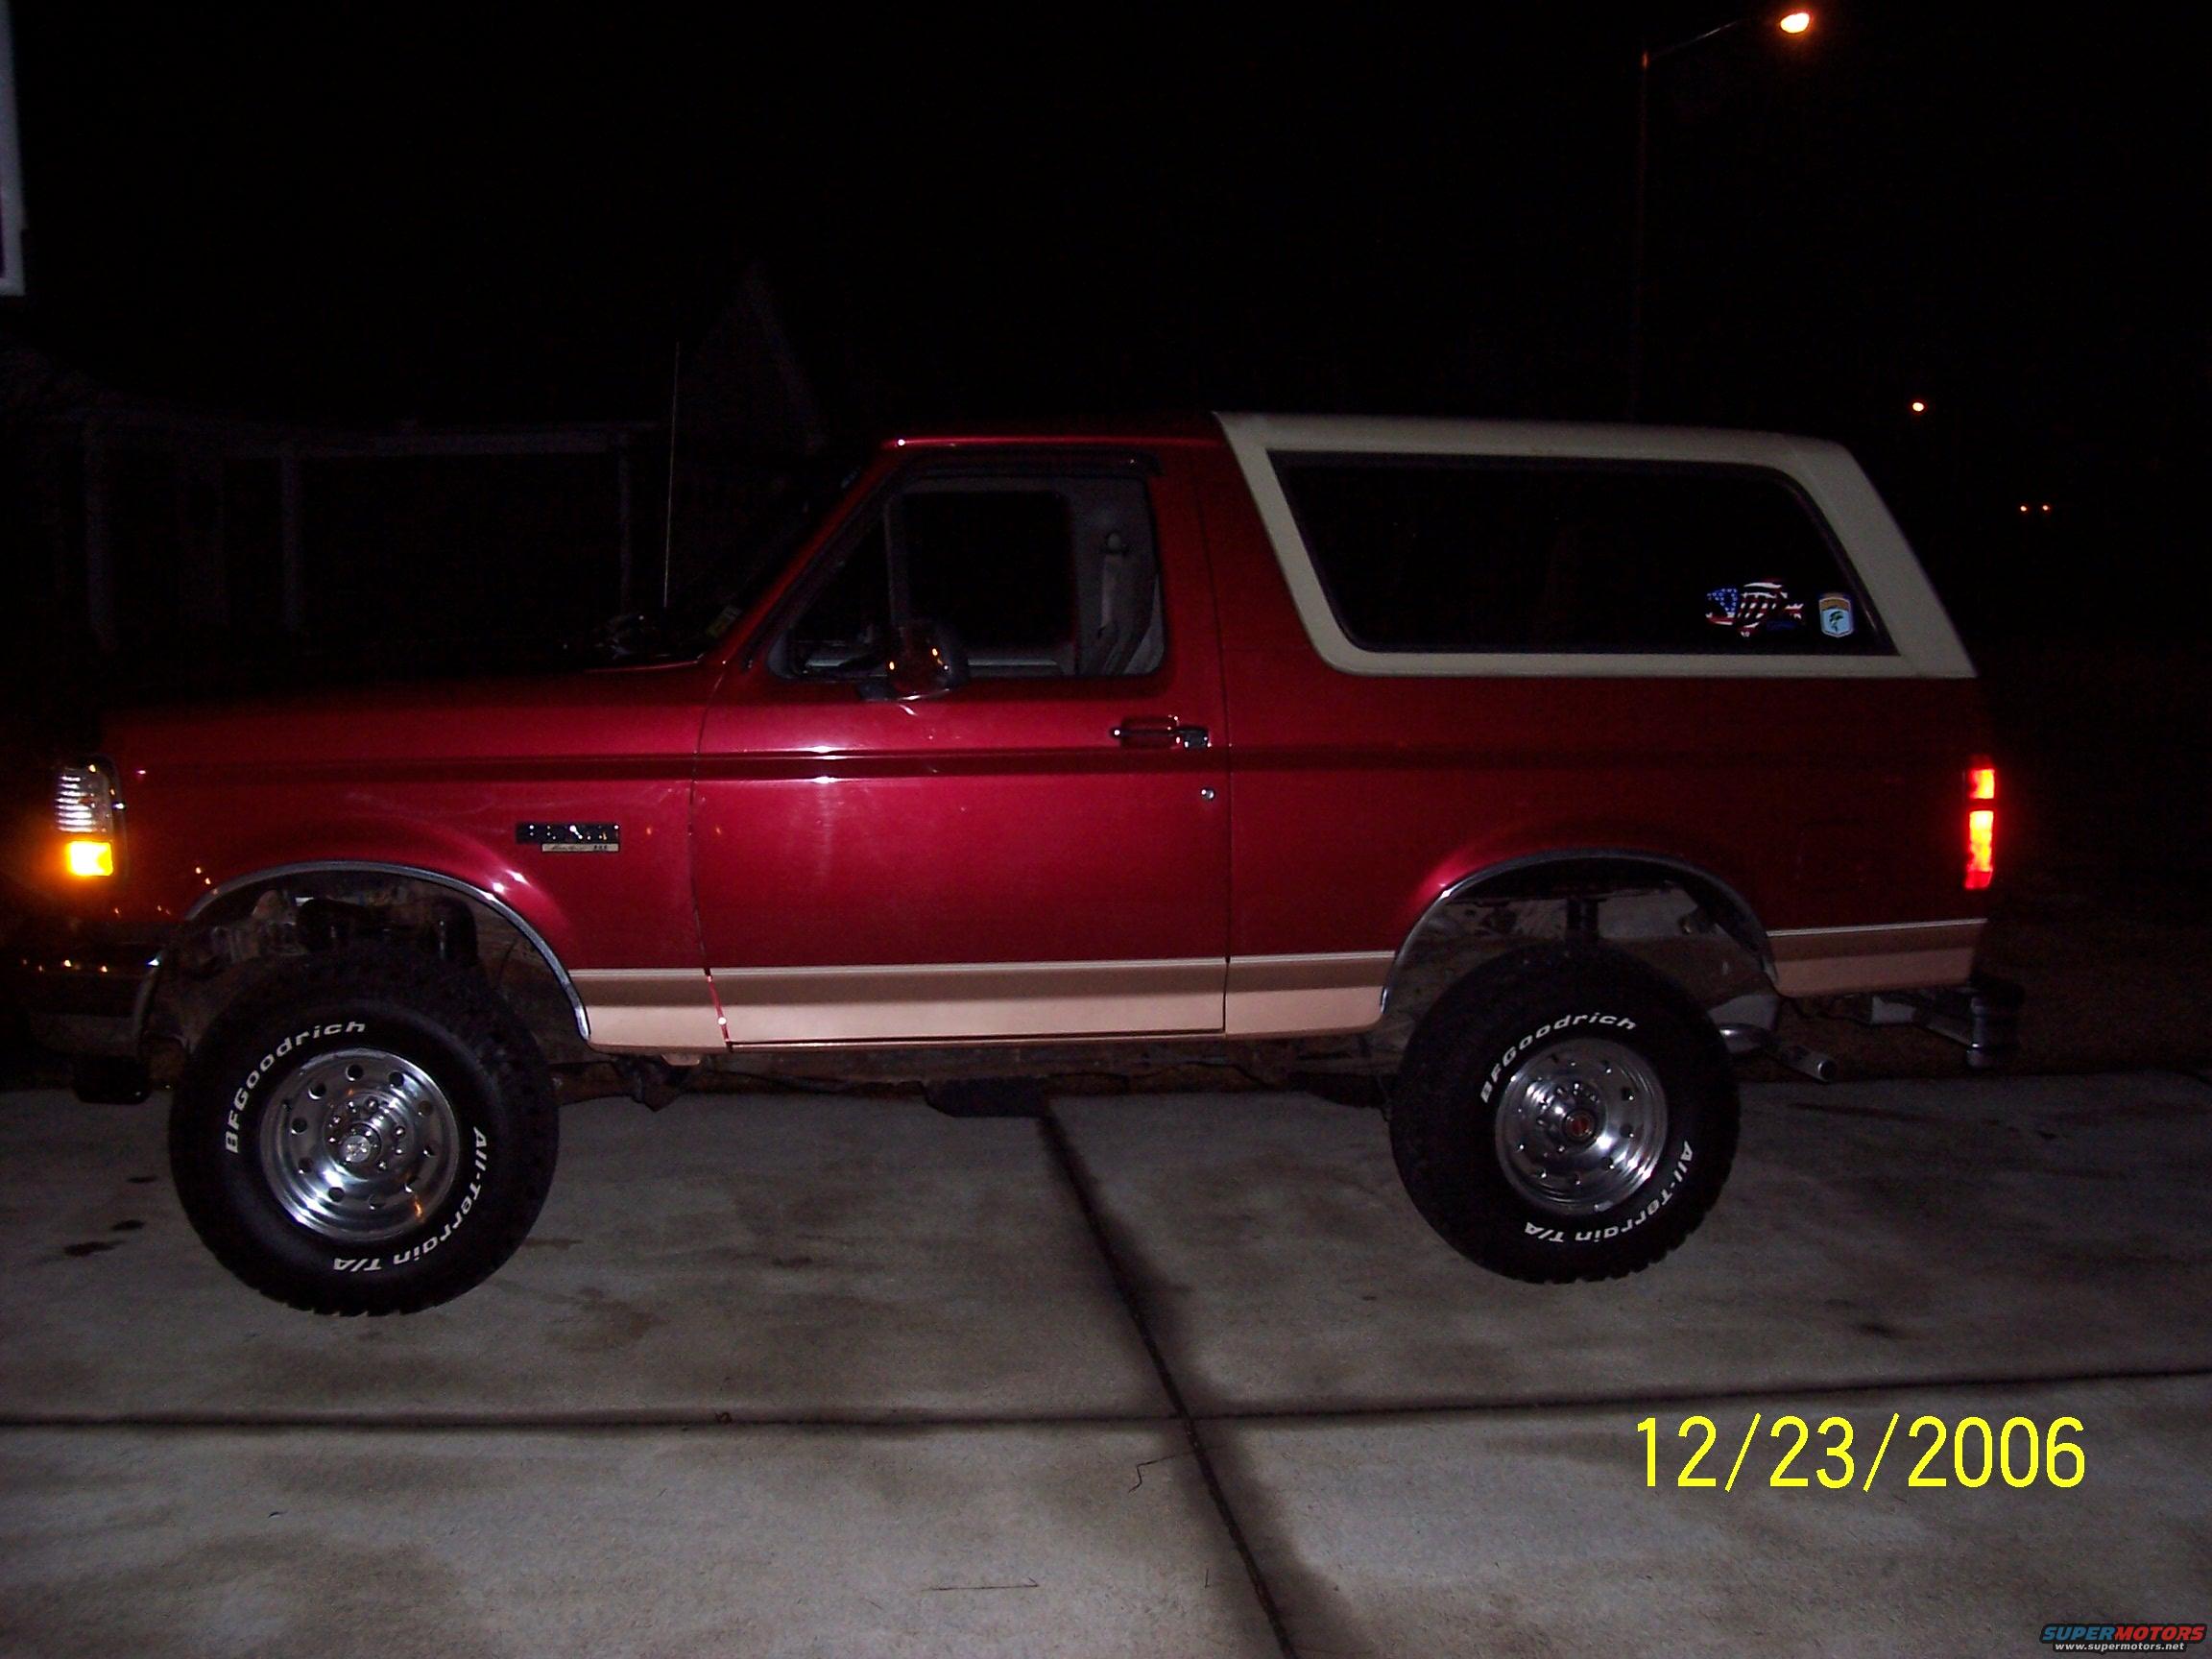 Body lifts for ford bronco #4